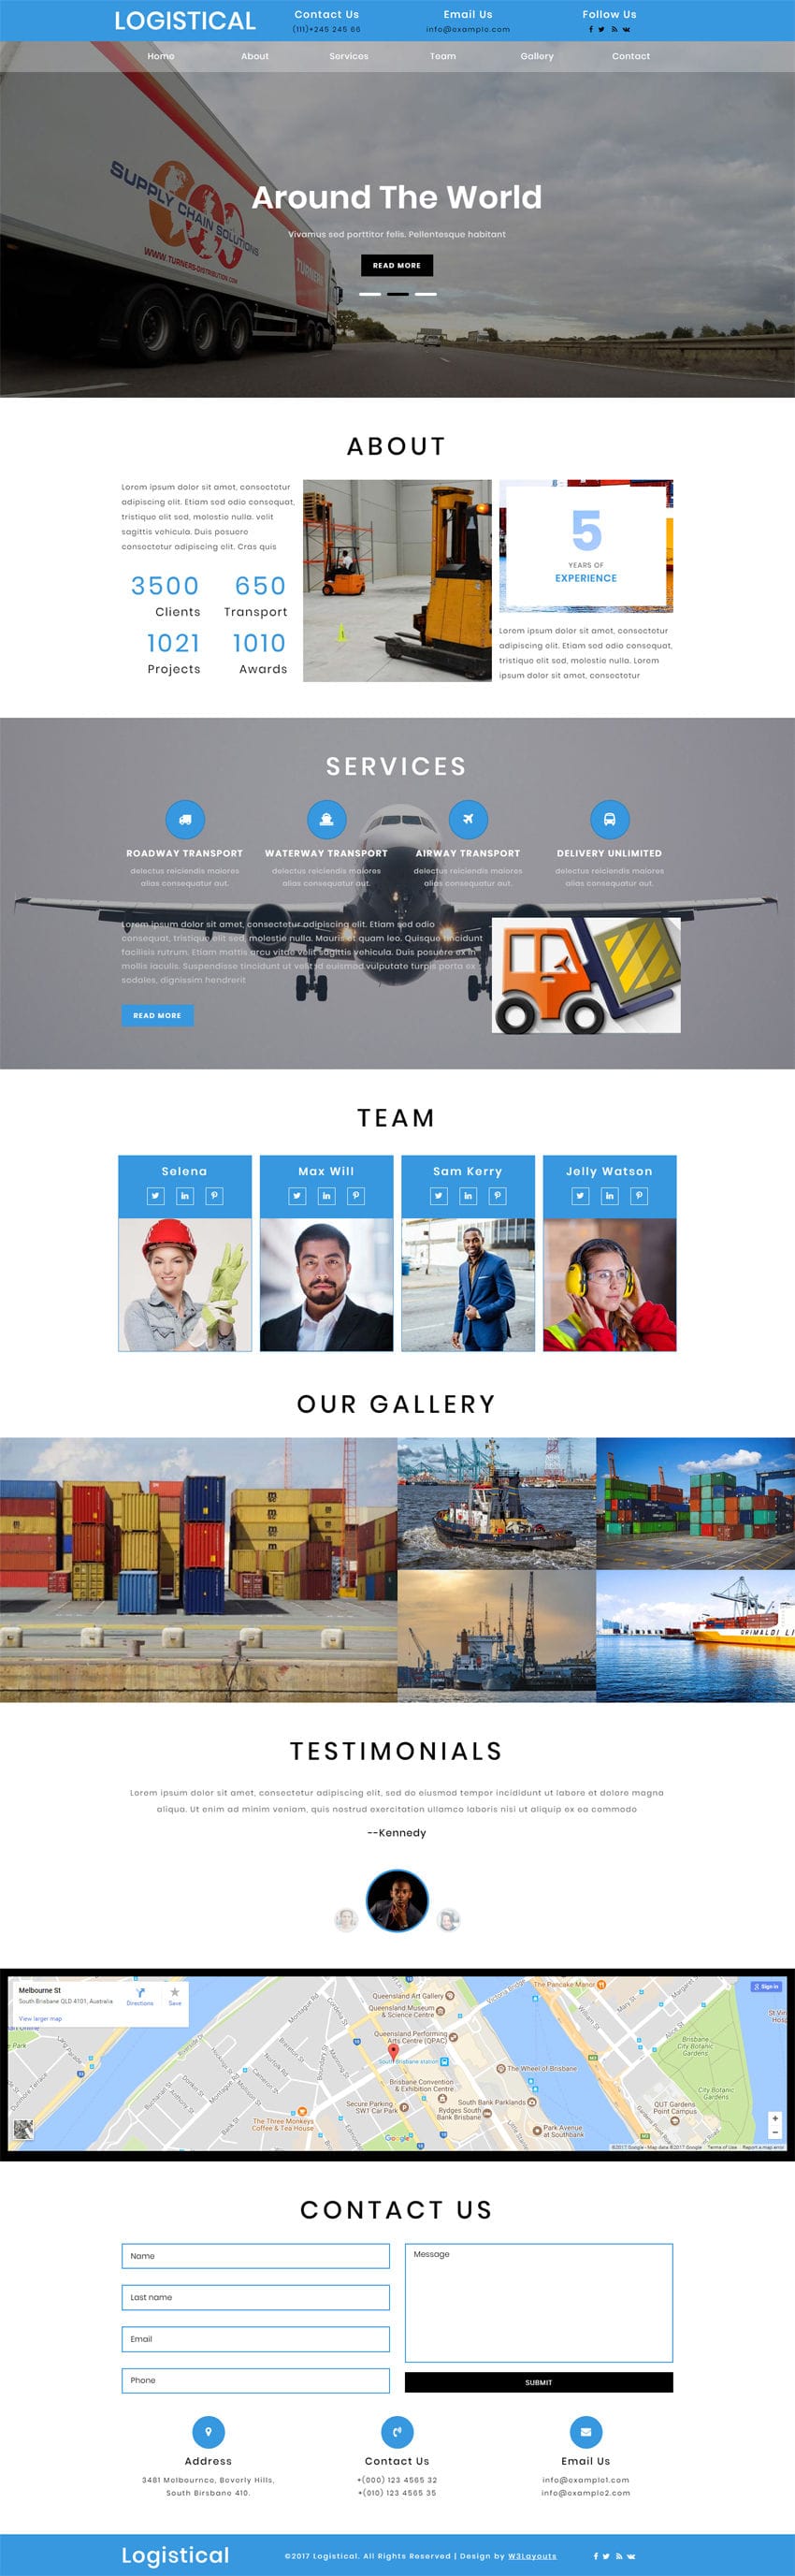 Download Logistical, a transportation & logistics website template. It is entirely built in Bootstrap framework, HTML5, CSS3 and Jquery and looks stunning.